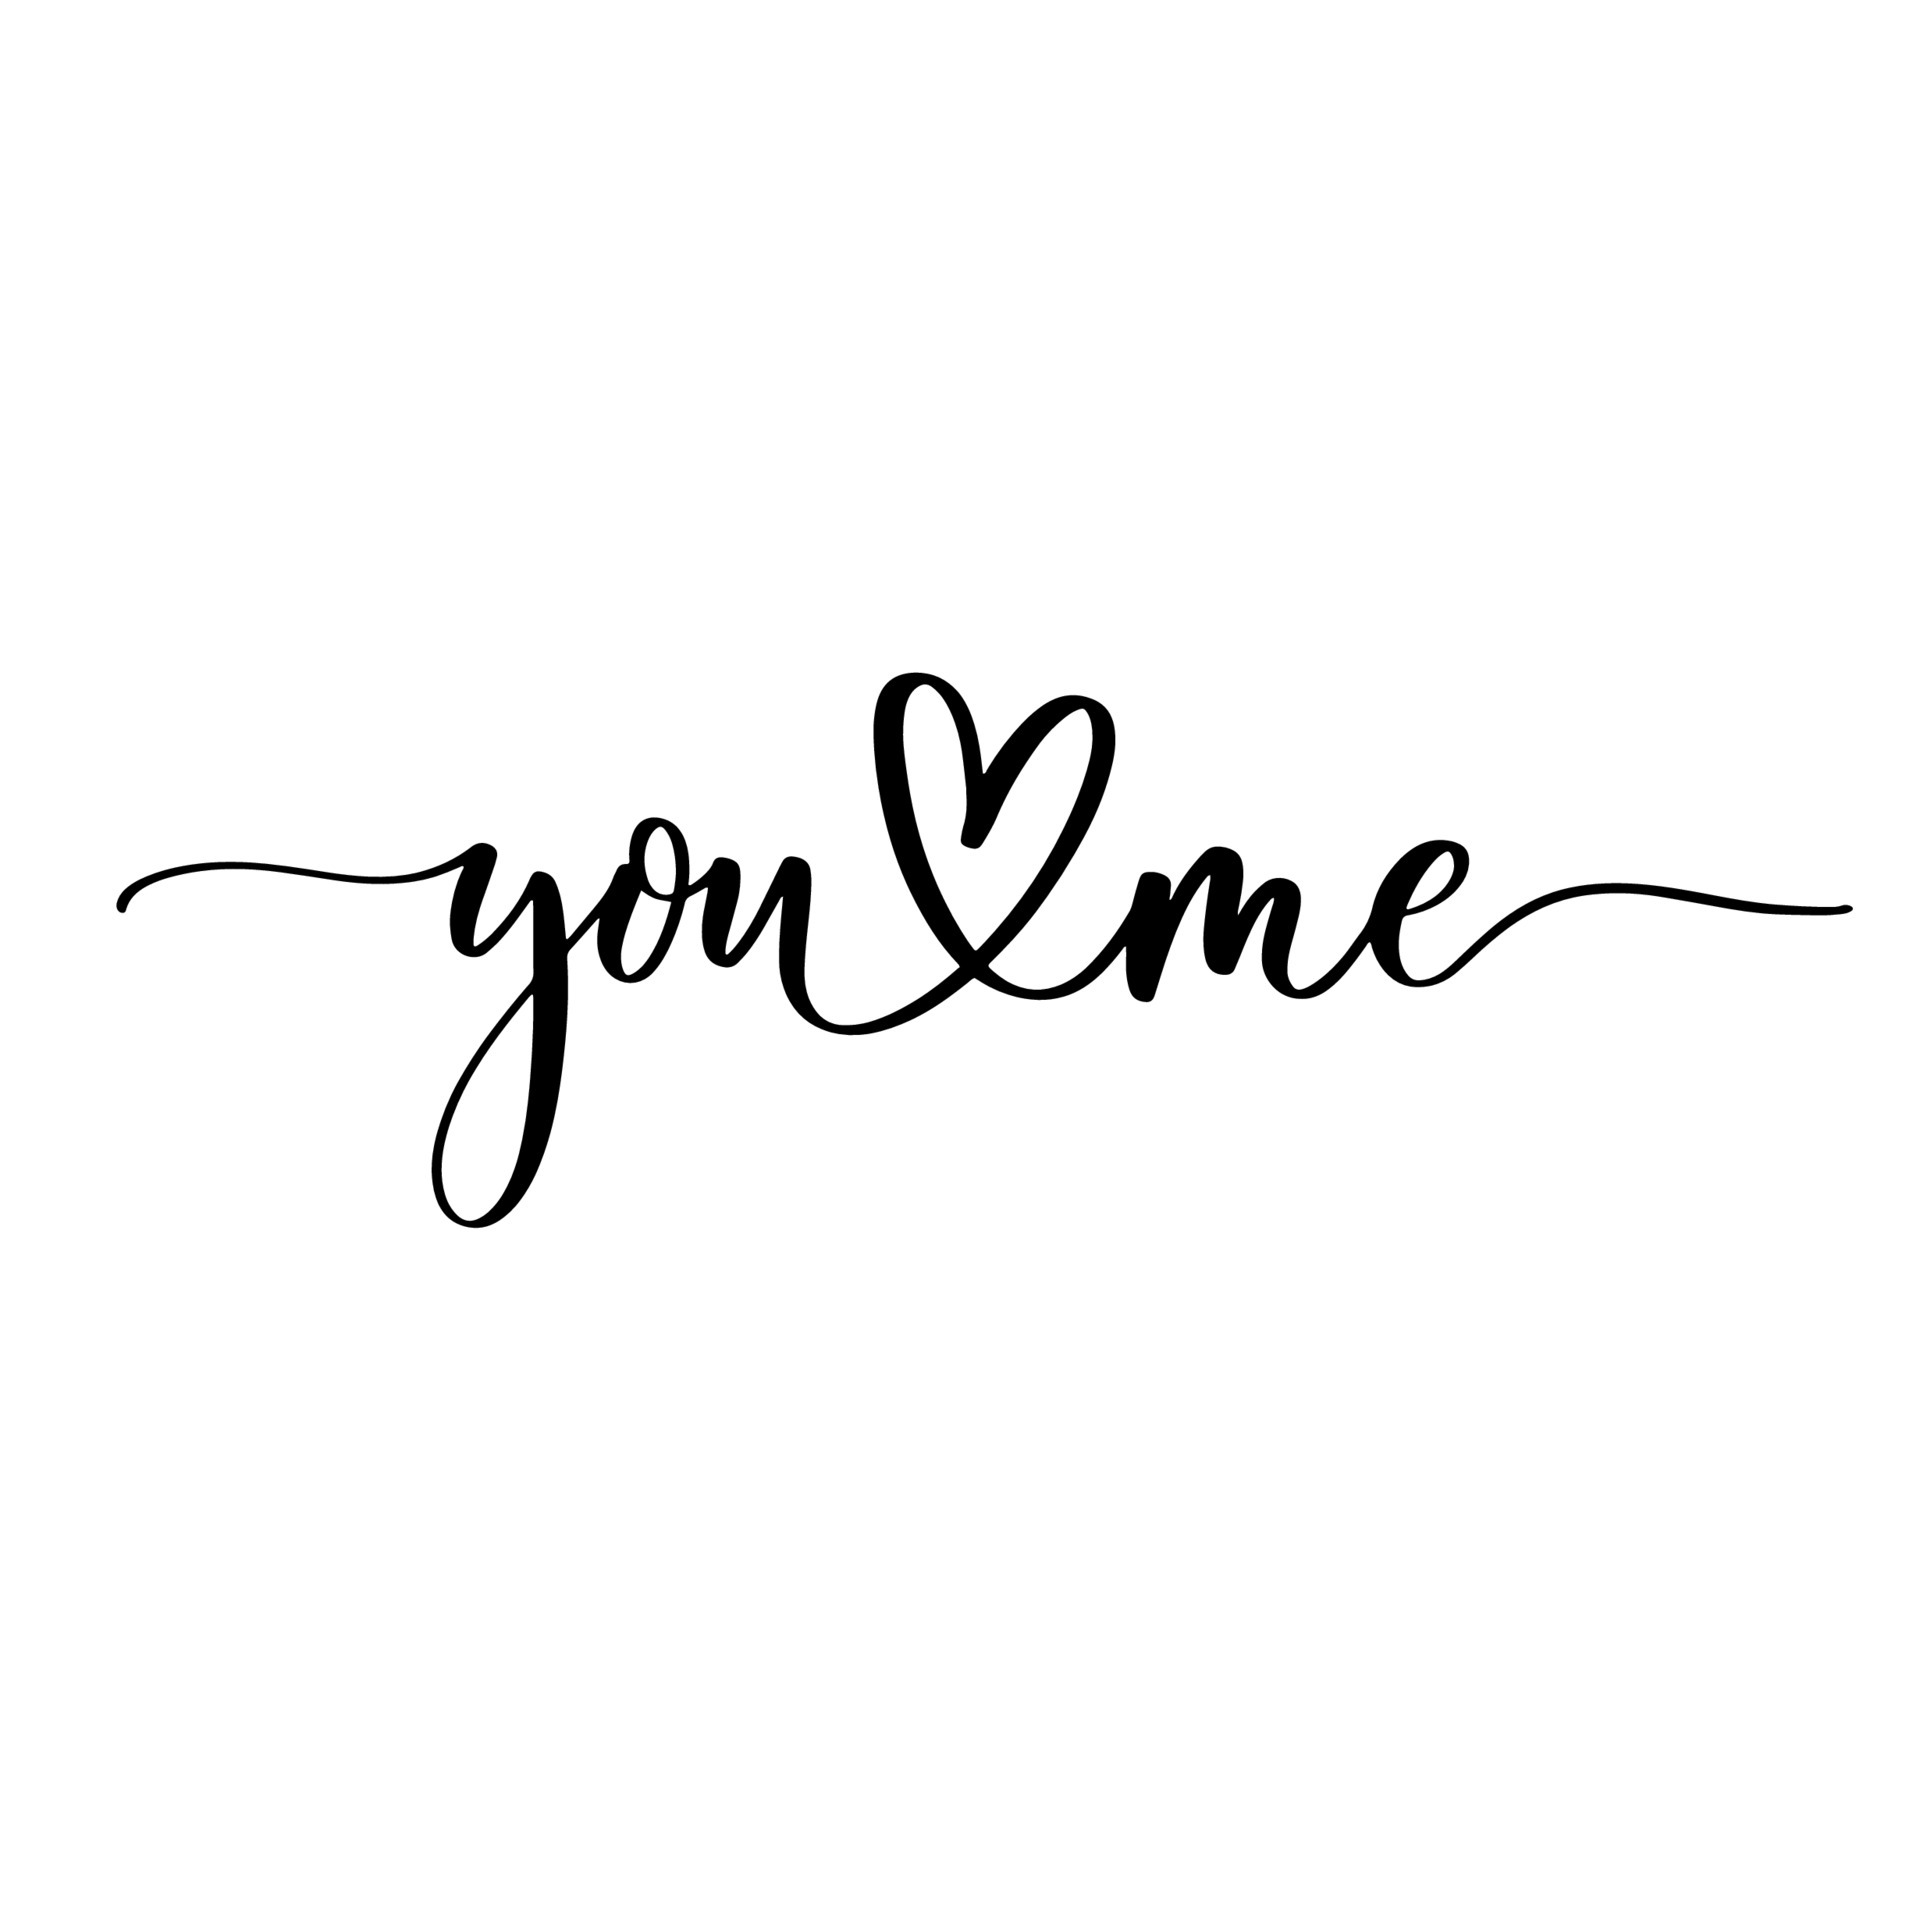 You Me. Hand lettering and modern calligraphy inscription for design ...